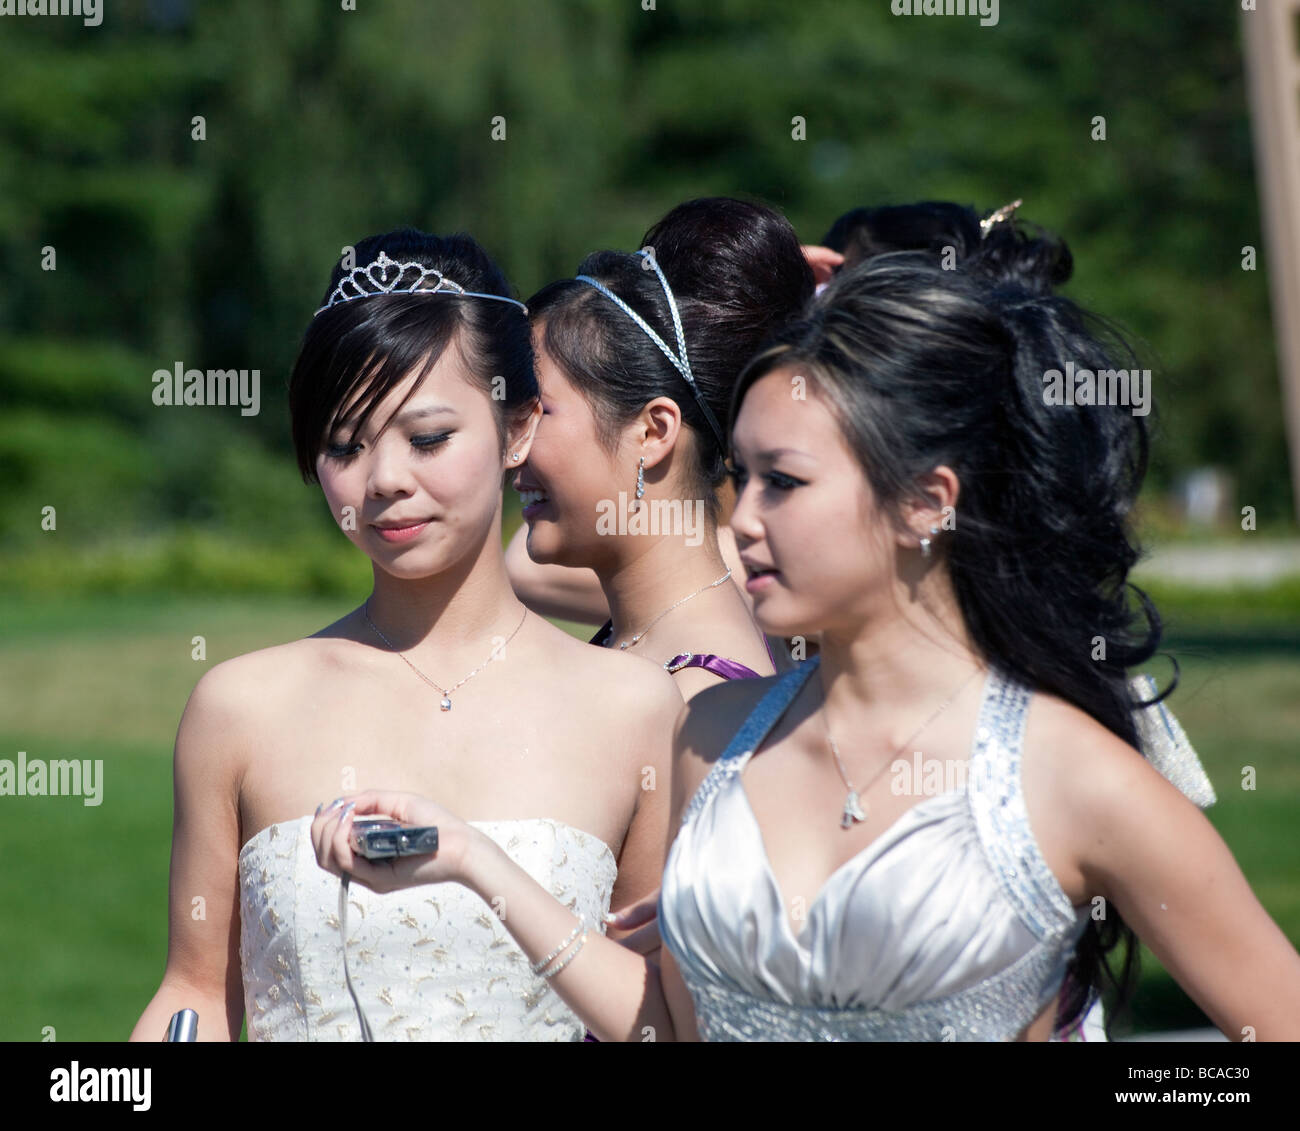 girl students in formal dress for school prom posing for photographs at Queen Elizabeth Park, Vancouver, British Columbia, Canad Stock Photo